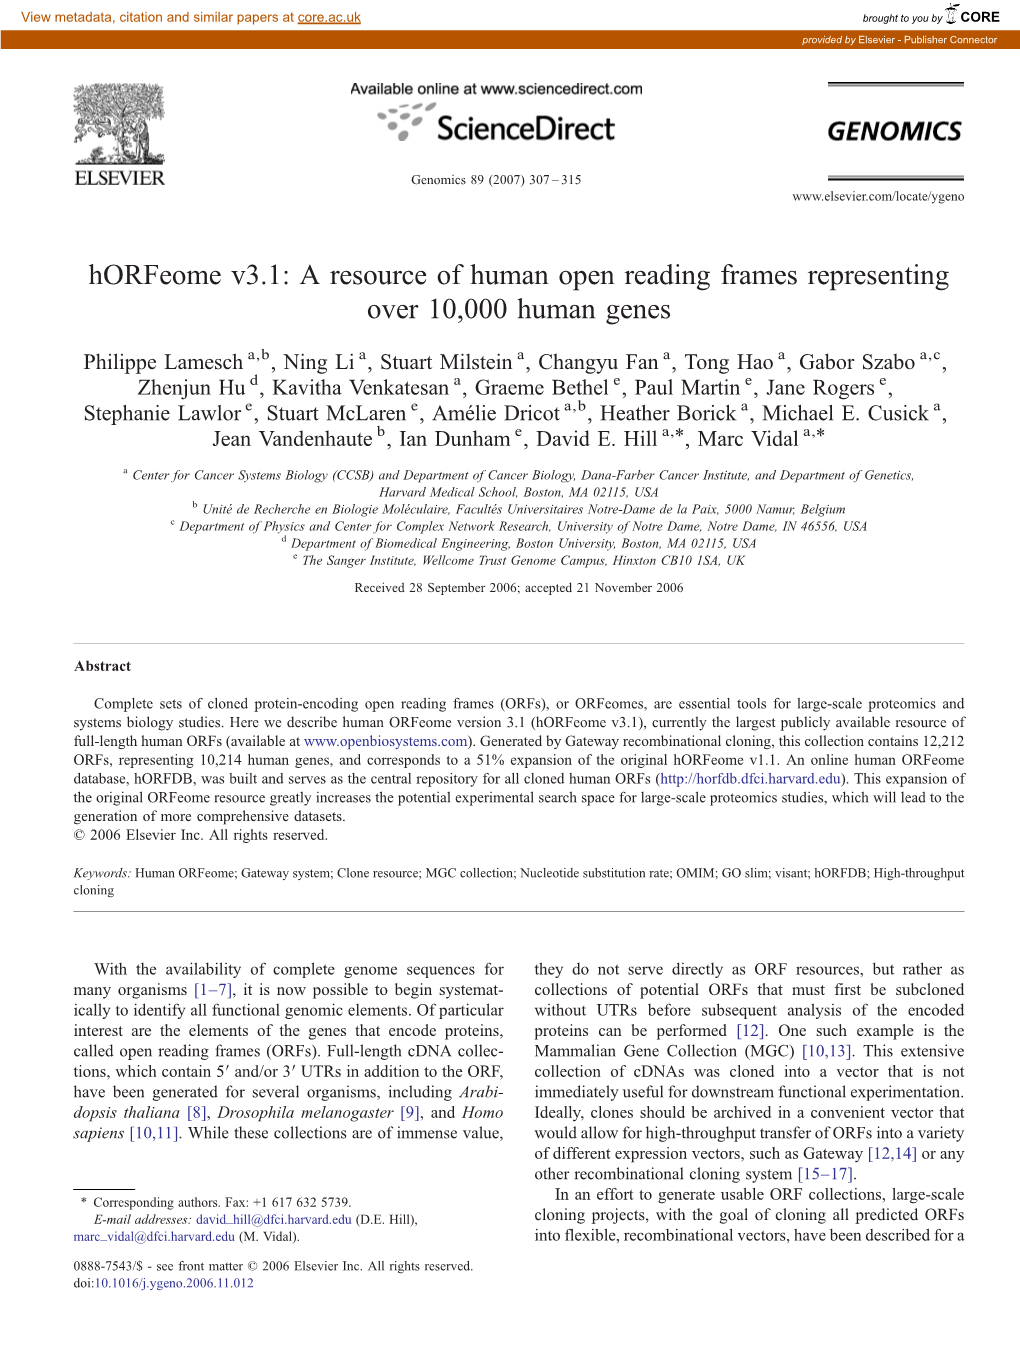 Horfeome V3.1: a Resource of Human Open Reading Frames Representing Over 10,000 Human Genes